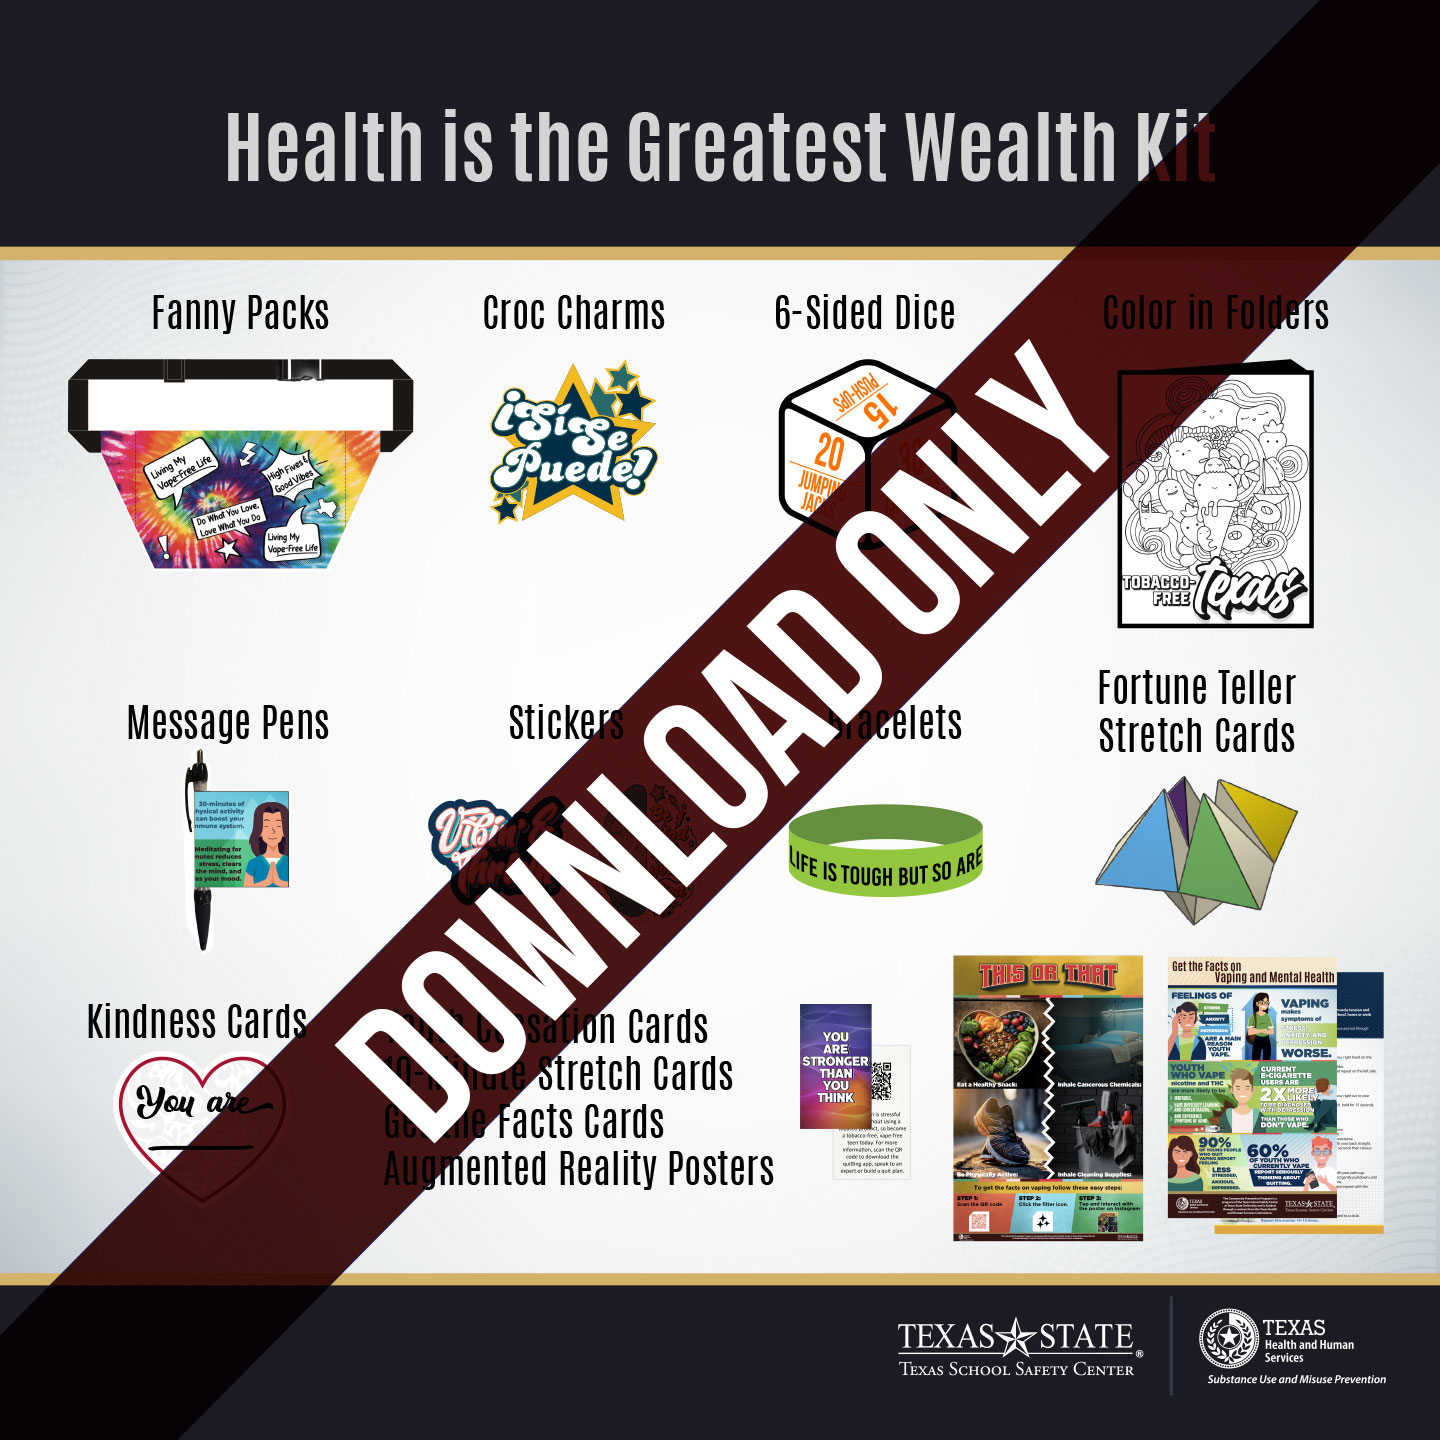 Health is the Greatest Wealth Kit